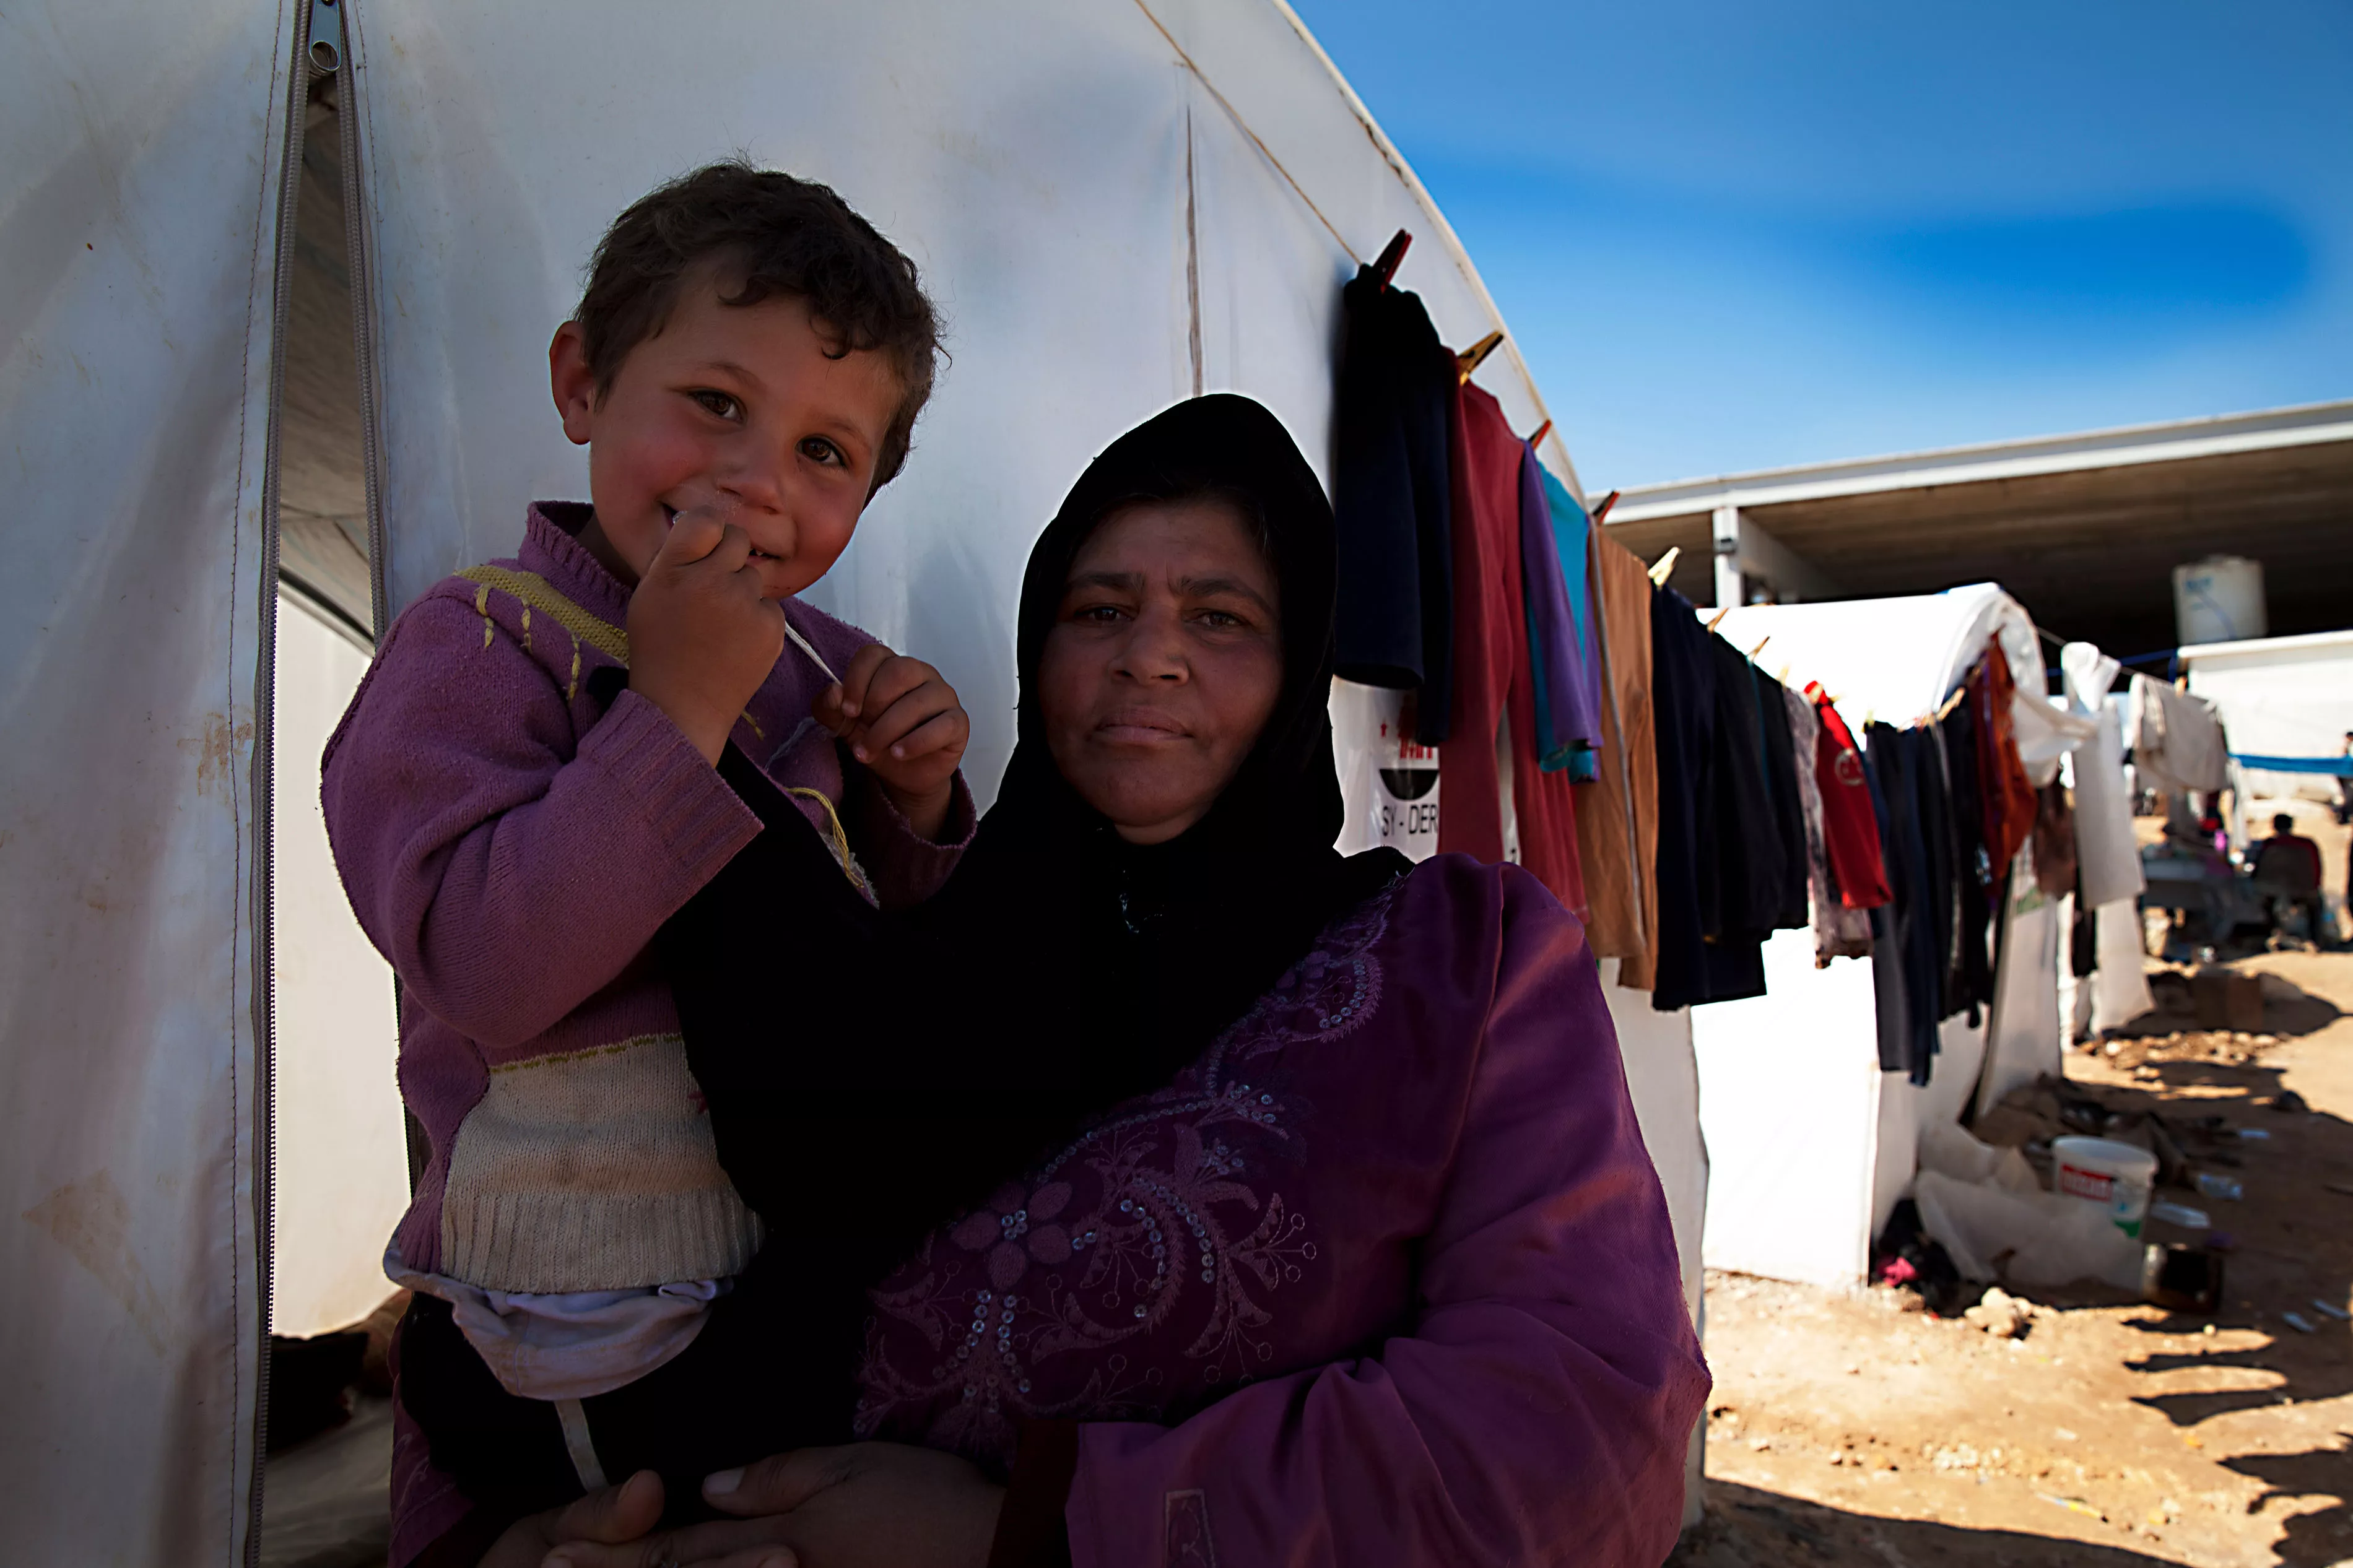 A Syrian displaced woman, Saleha Mustafa, and her young child in a transit camp next to the Turkish border.